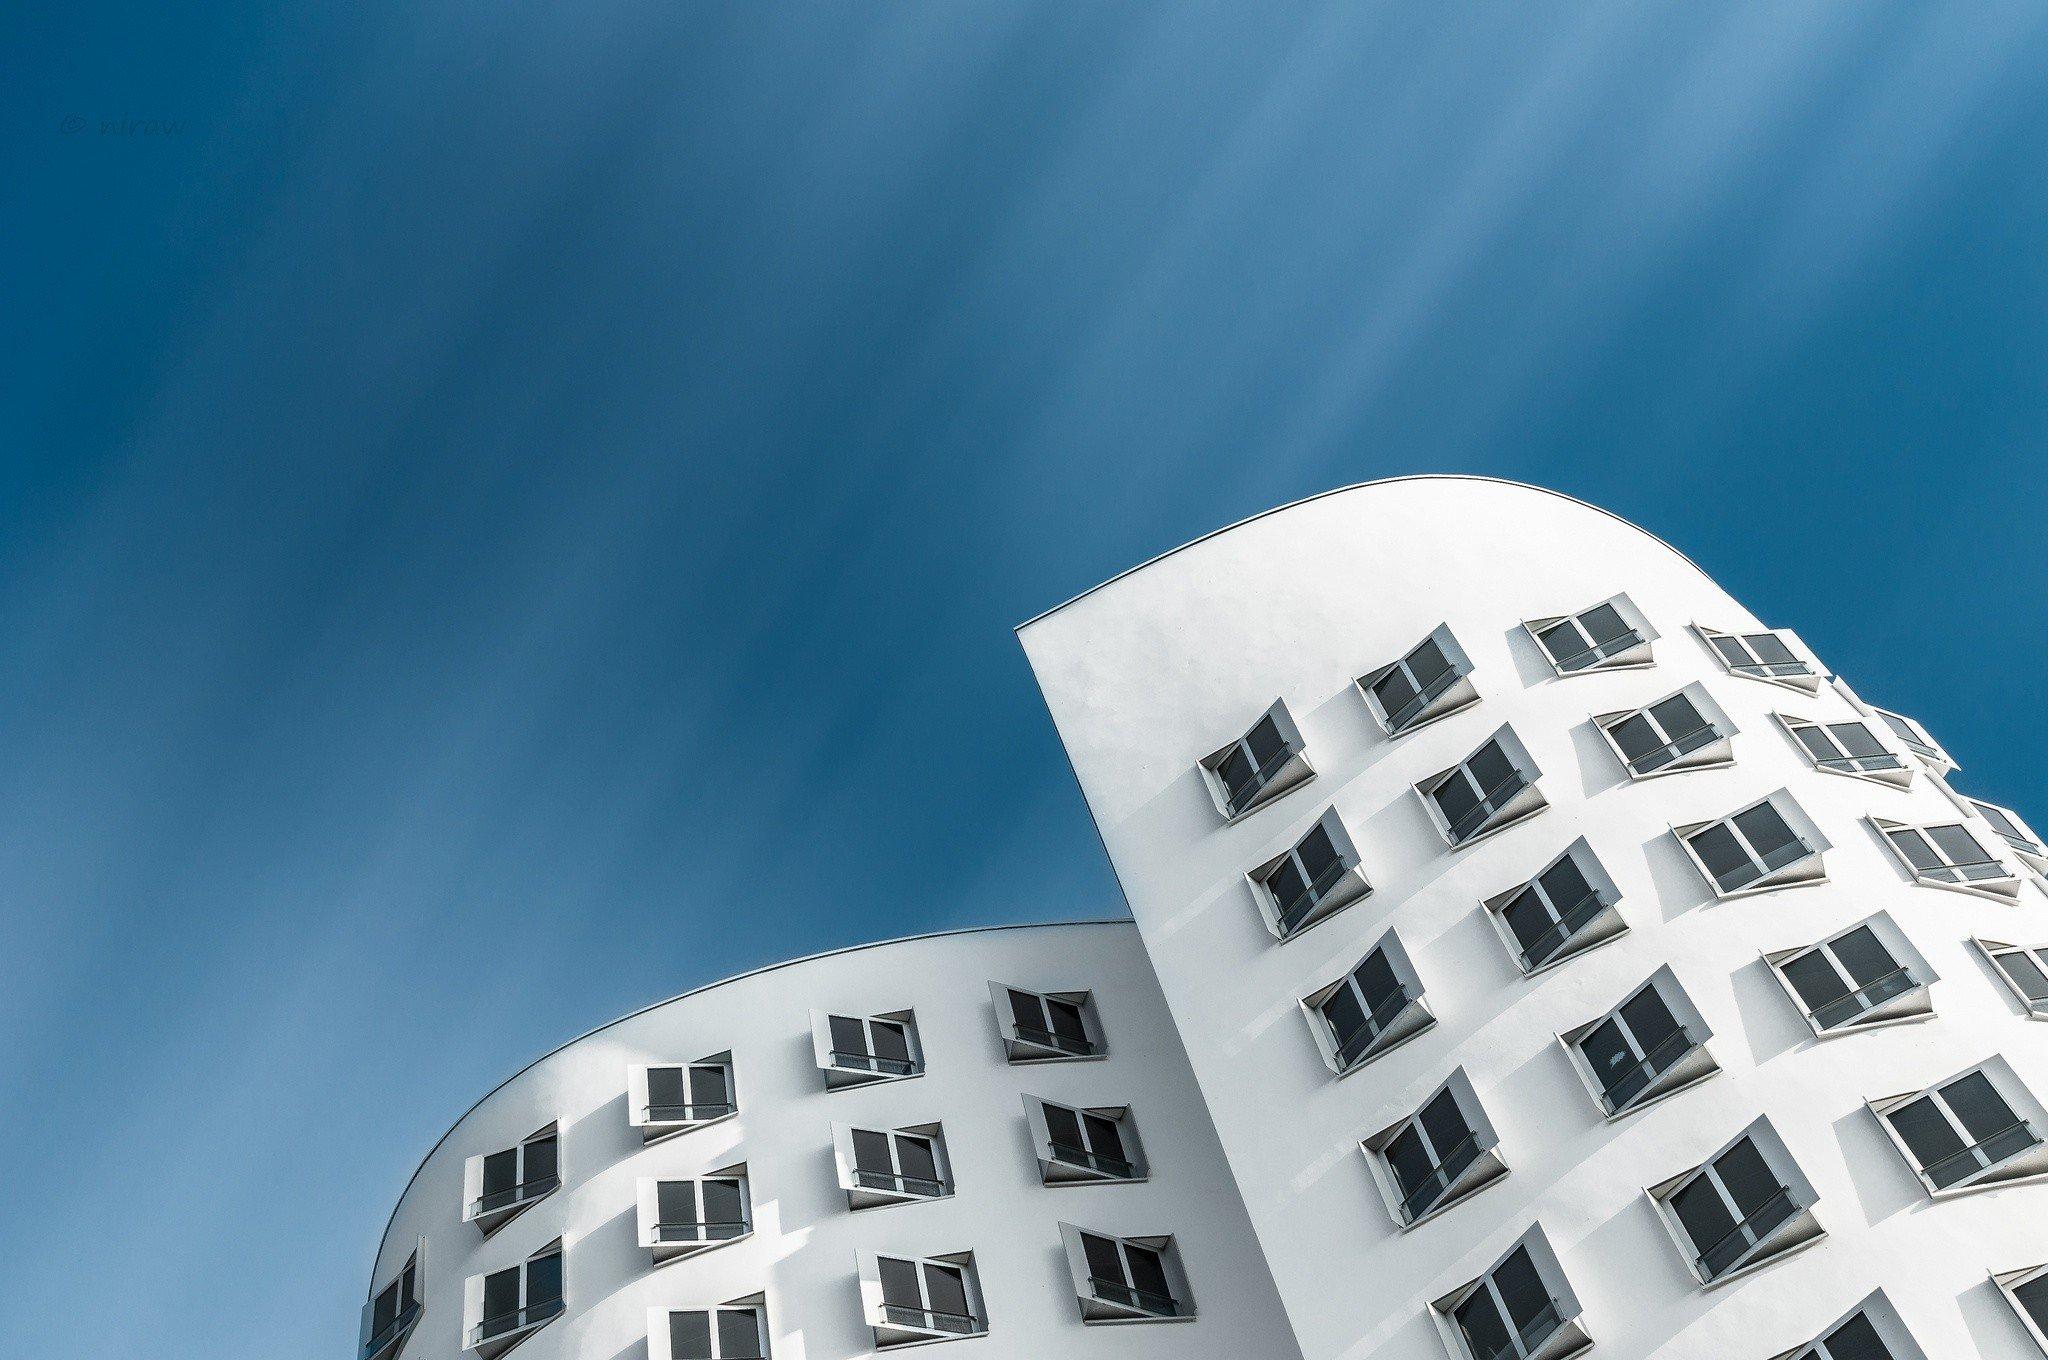 Düsseldorf, Architecture, Germany, Gehry House, Building, Worms eye